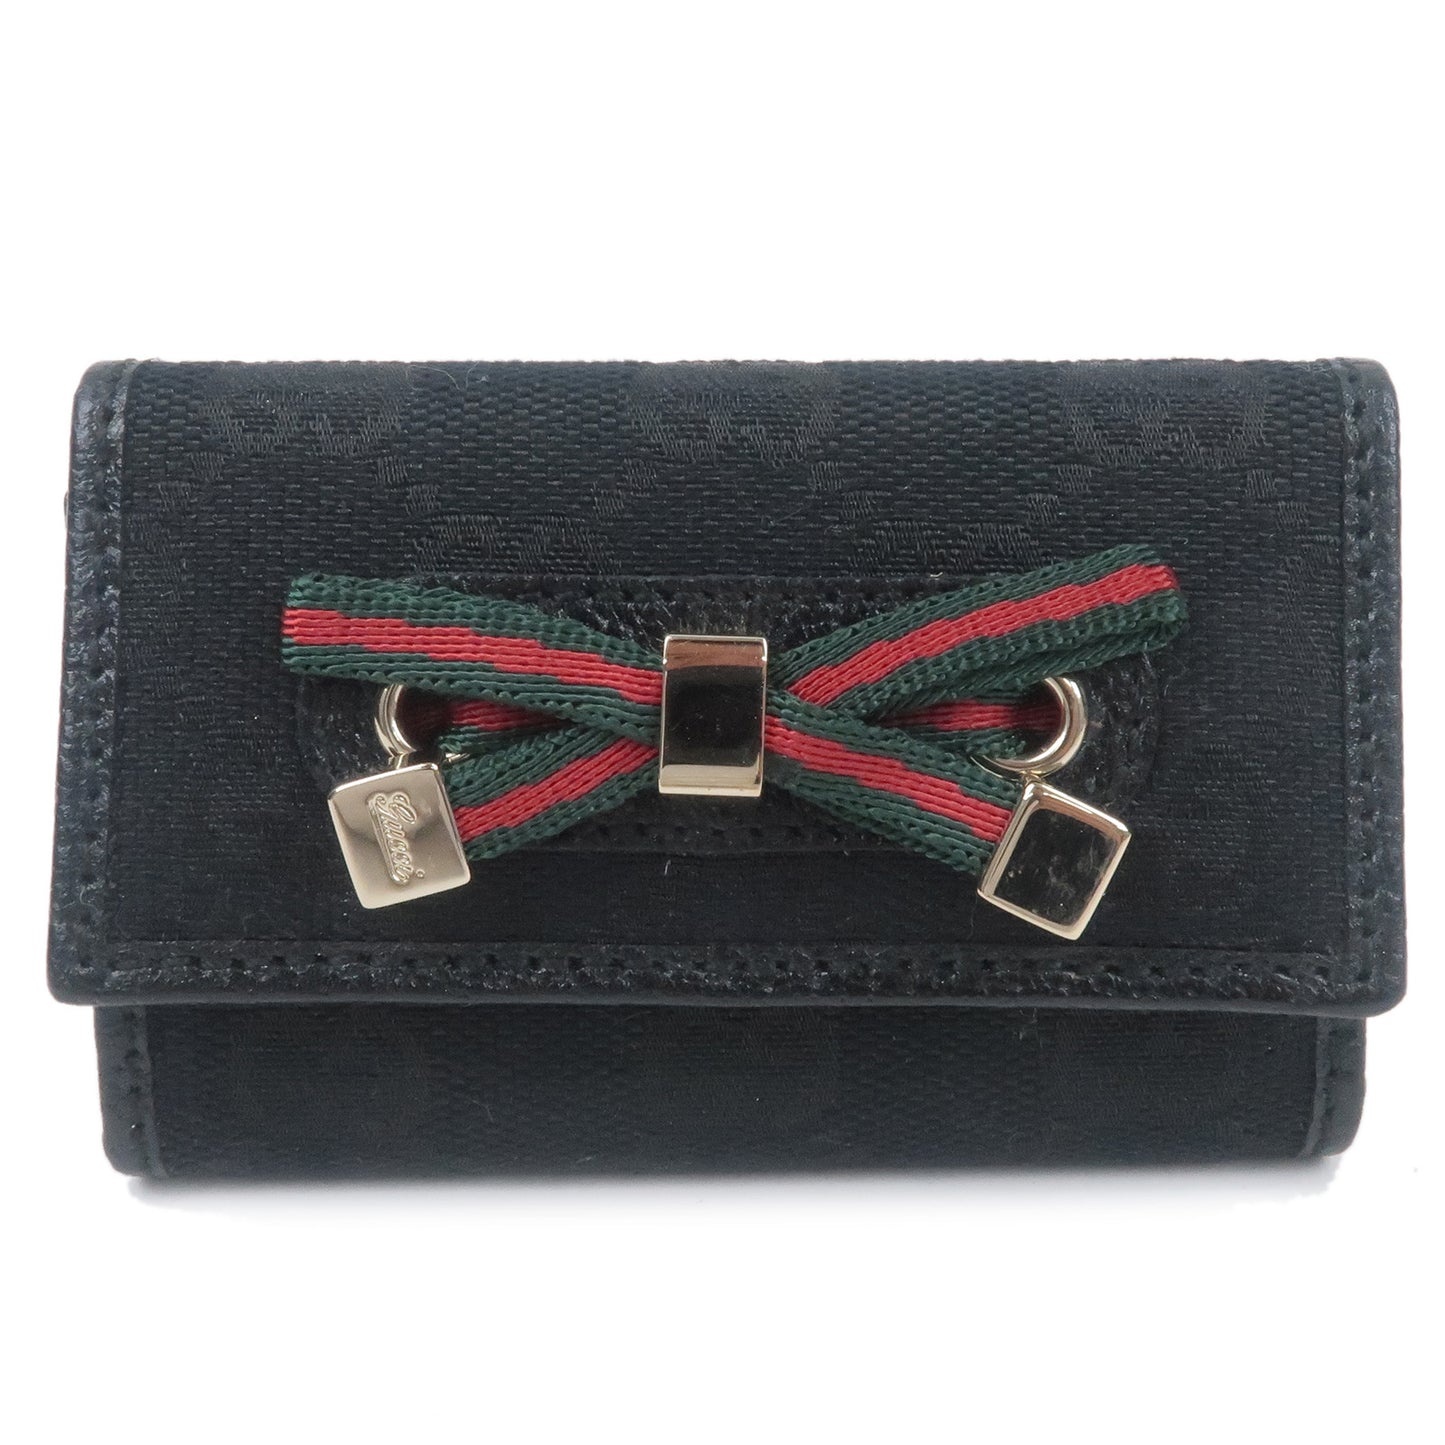 GUCCI-Sherry-Princy-GG-Canvas-Leather-6-Ring-Key-Case-Black-162770